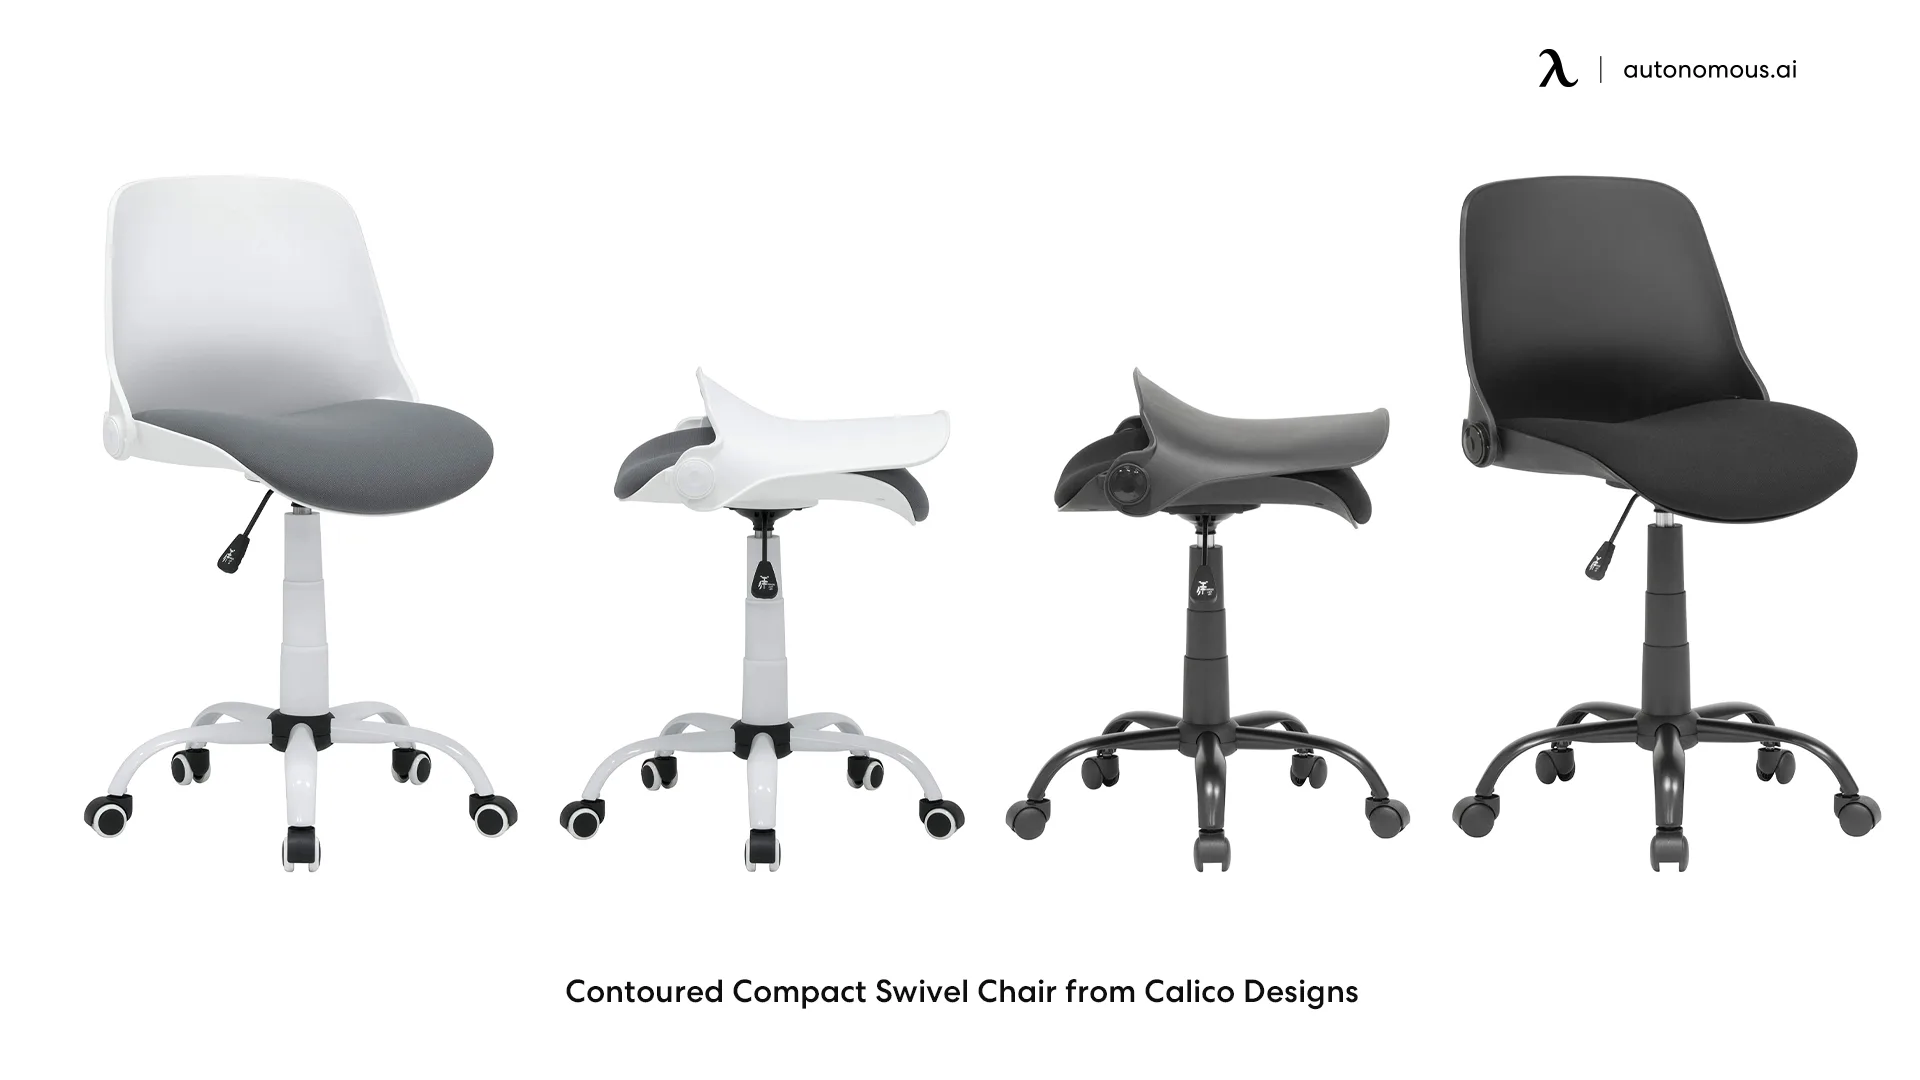 Contoured Compact Swivel Chair from Calico Designs